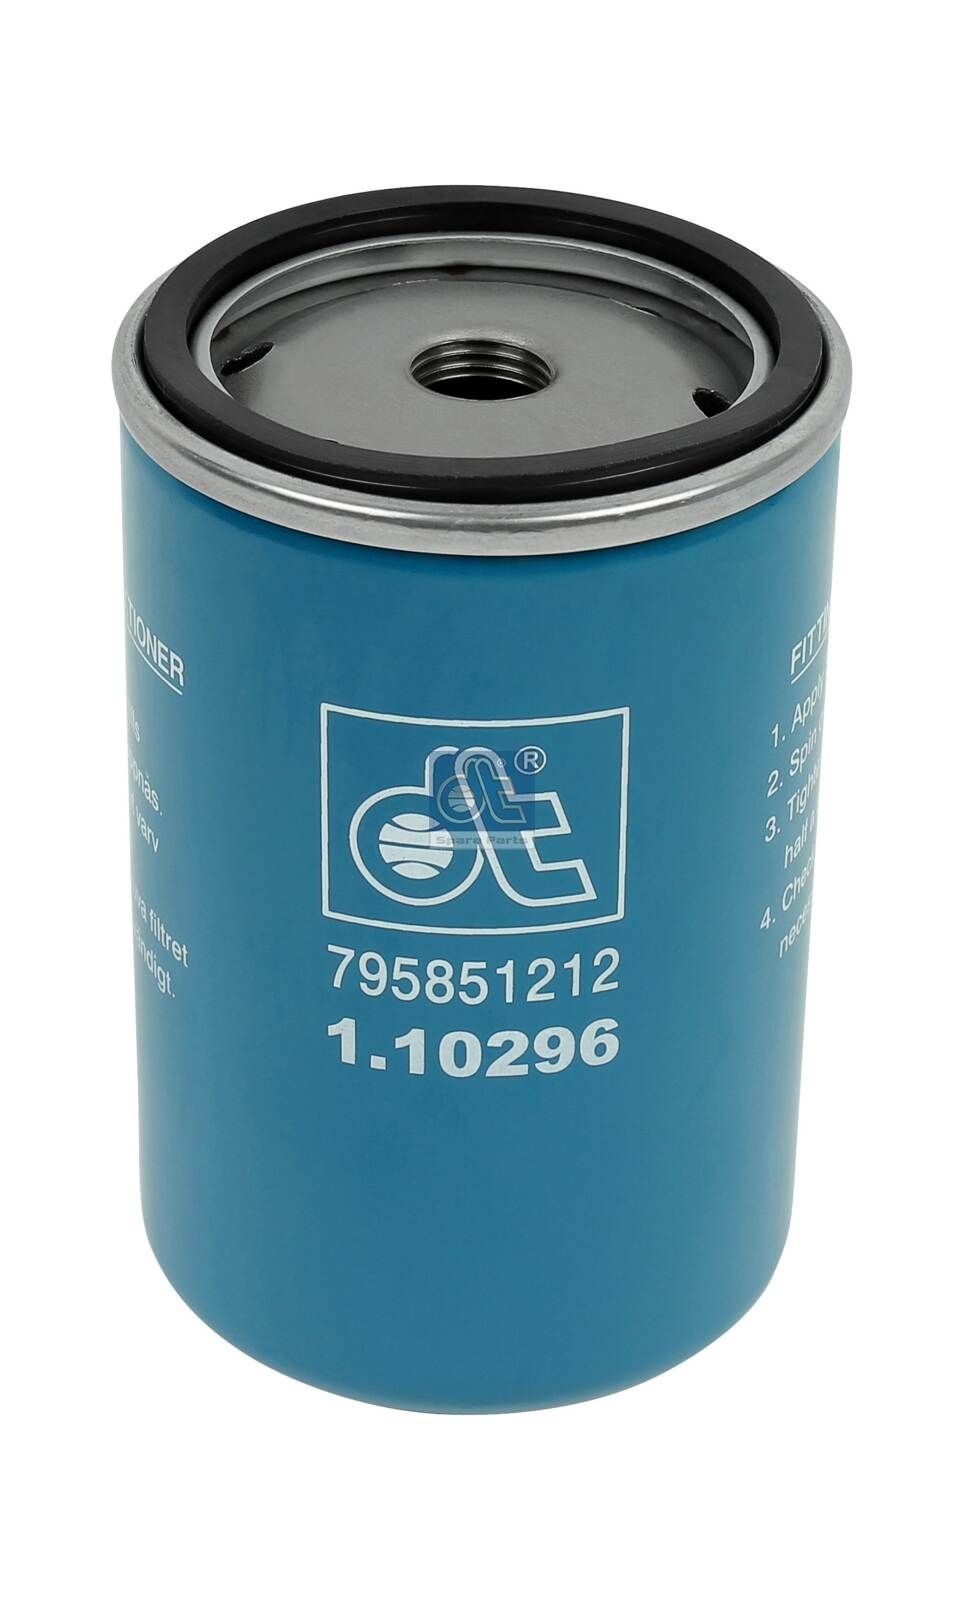 WK 723/1 DT Spare Parts 1.10296 Fuel filter 7 243 004